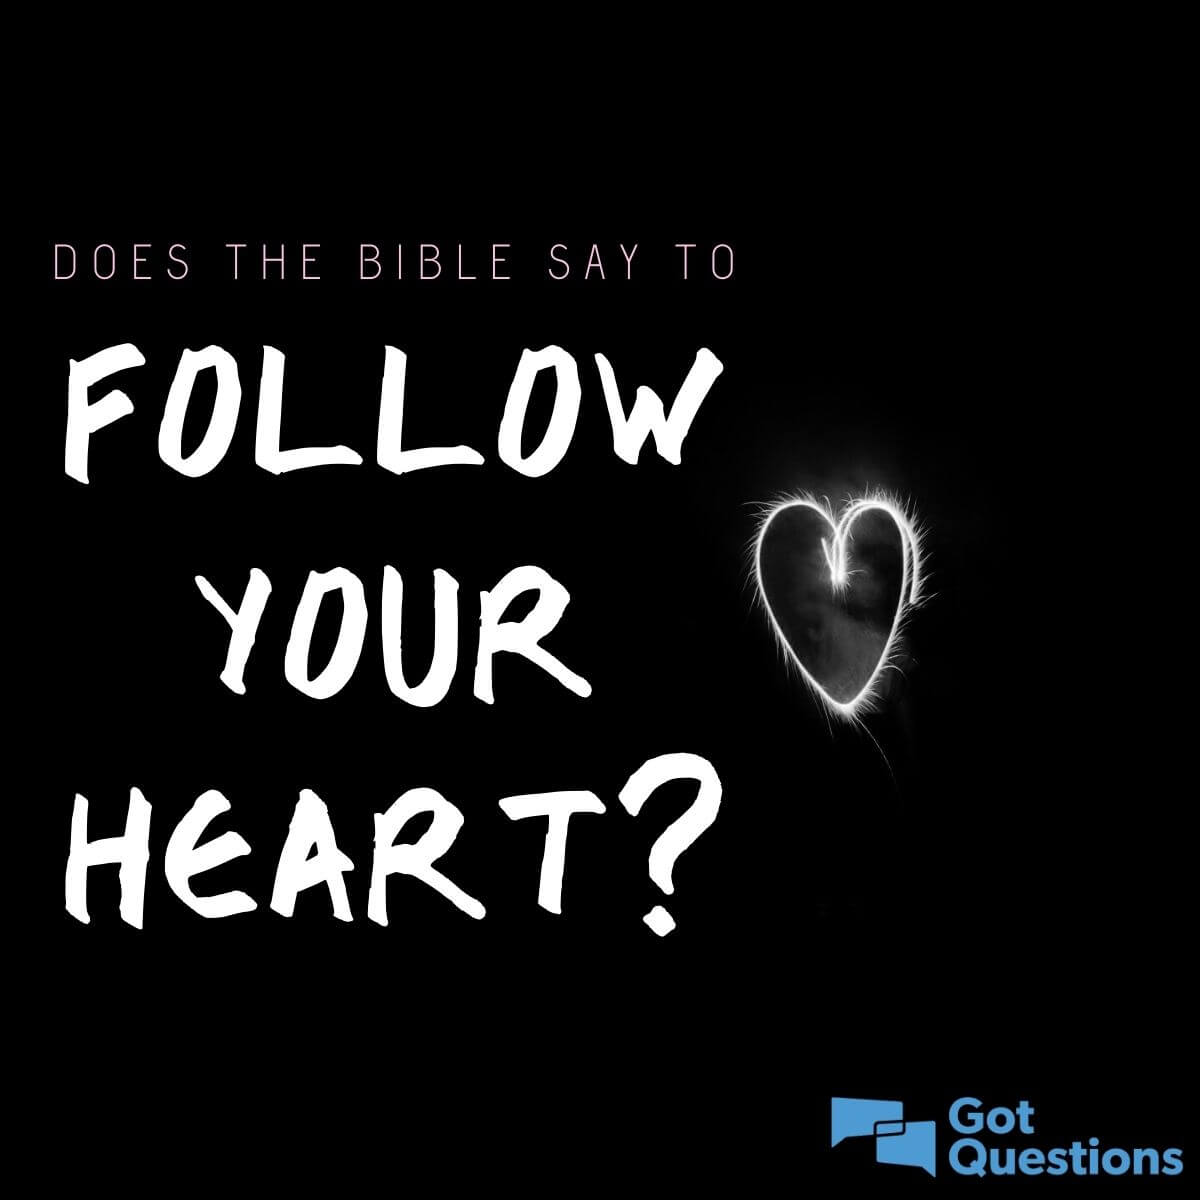 Does the Bible say to follow your heart?